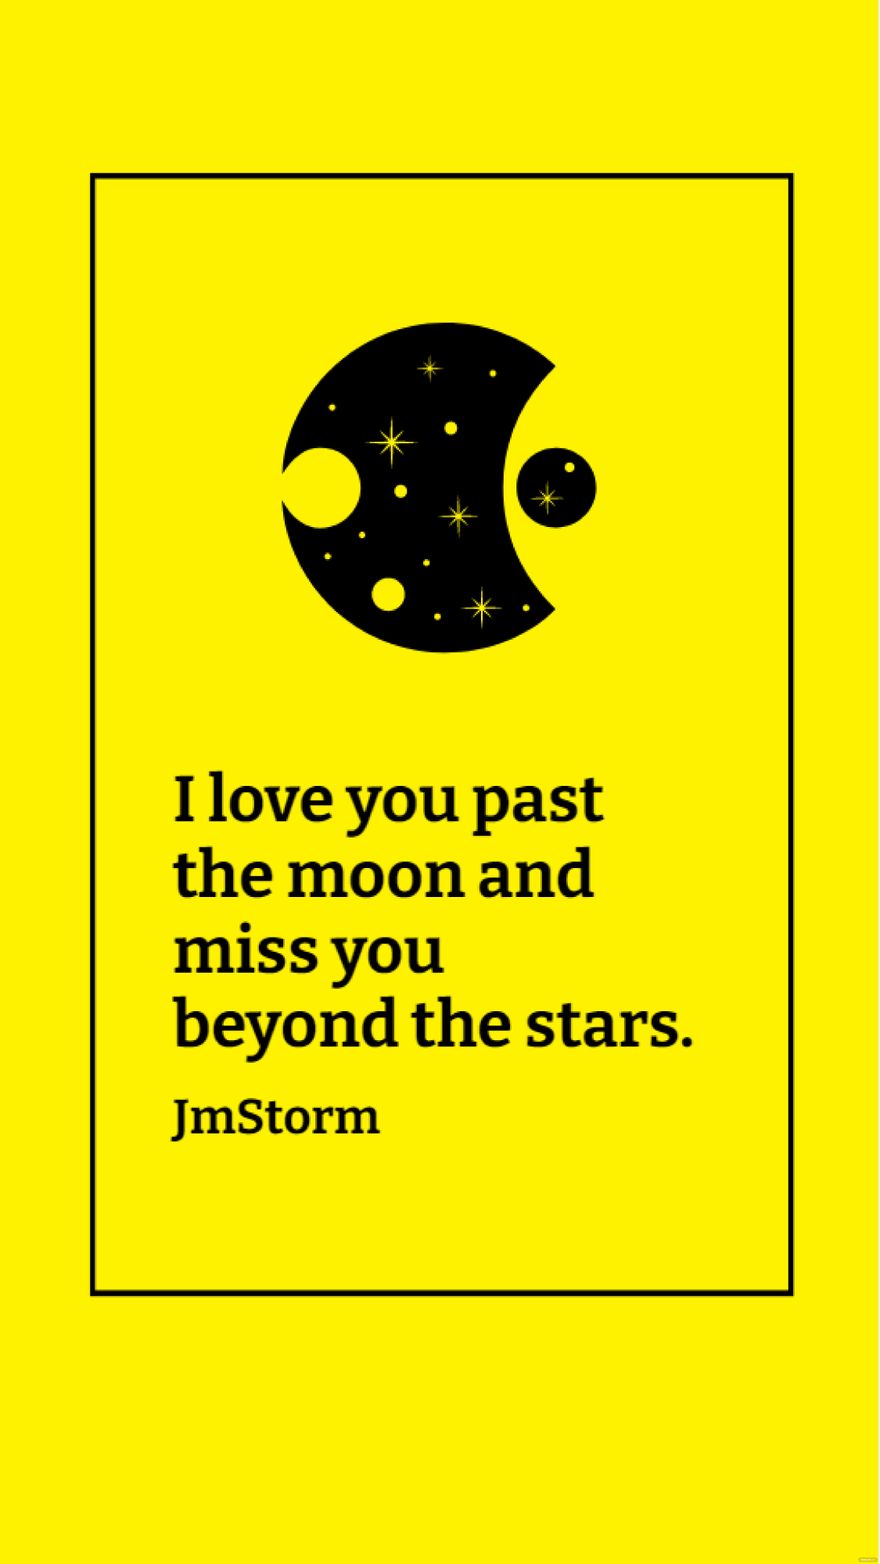 JmStorm - I love you past the moon and miss you beyond the stars.